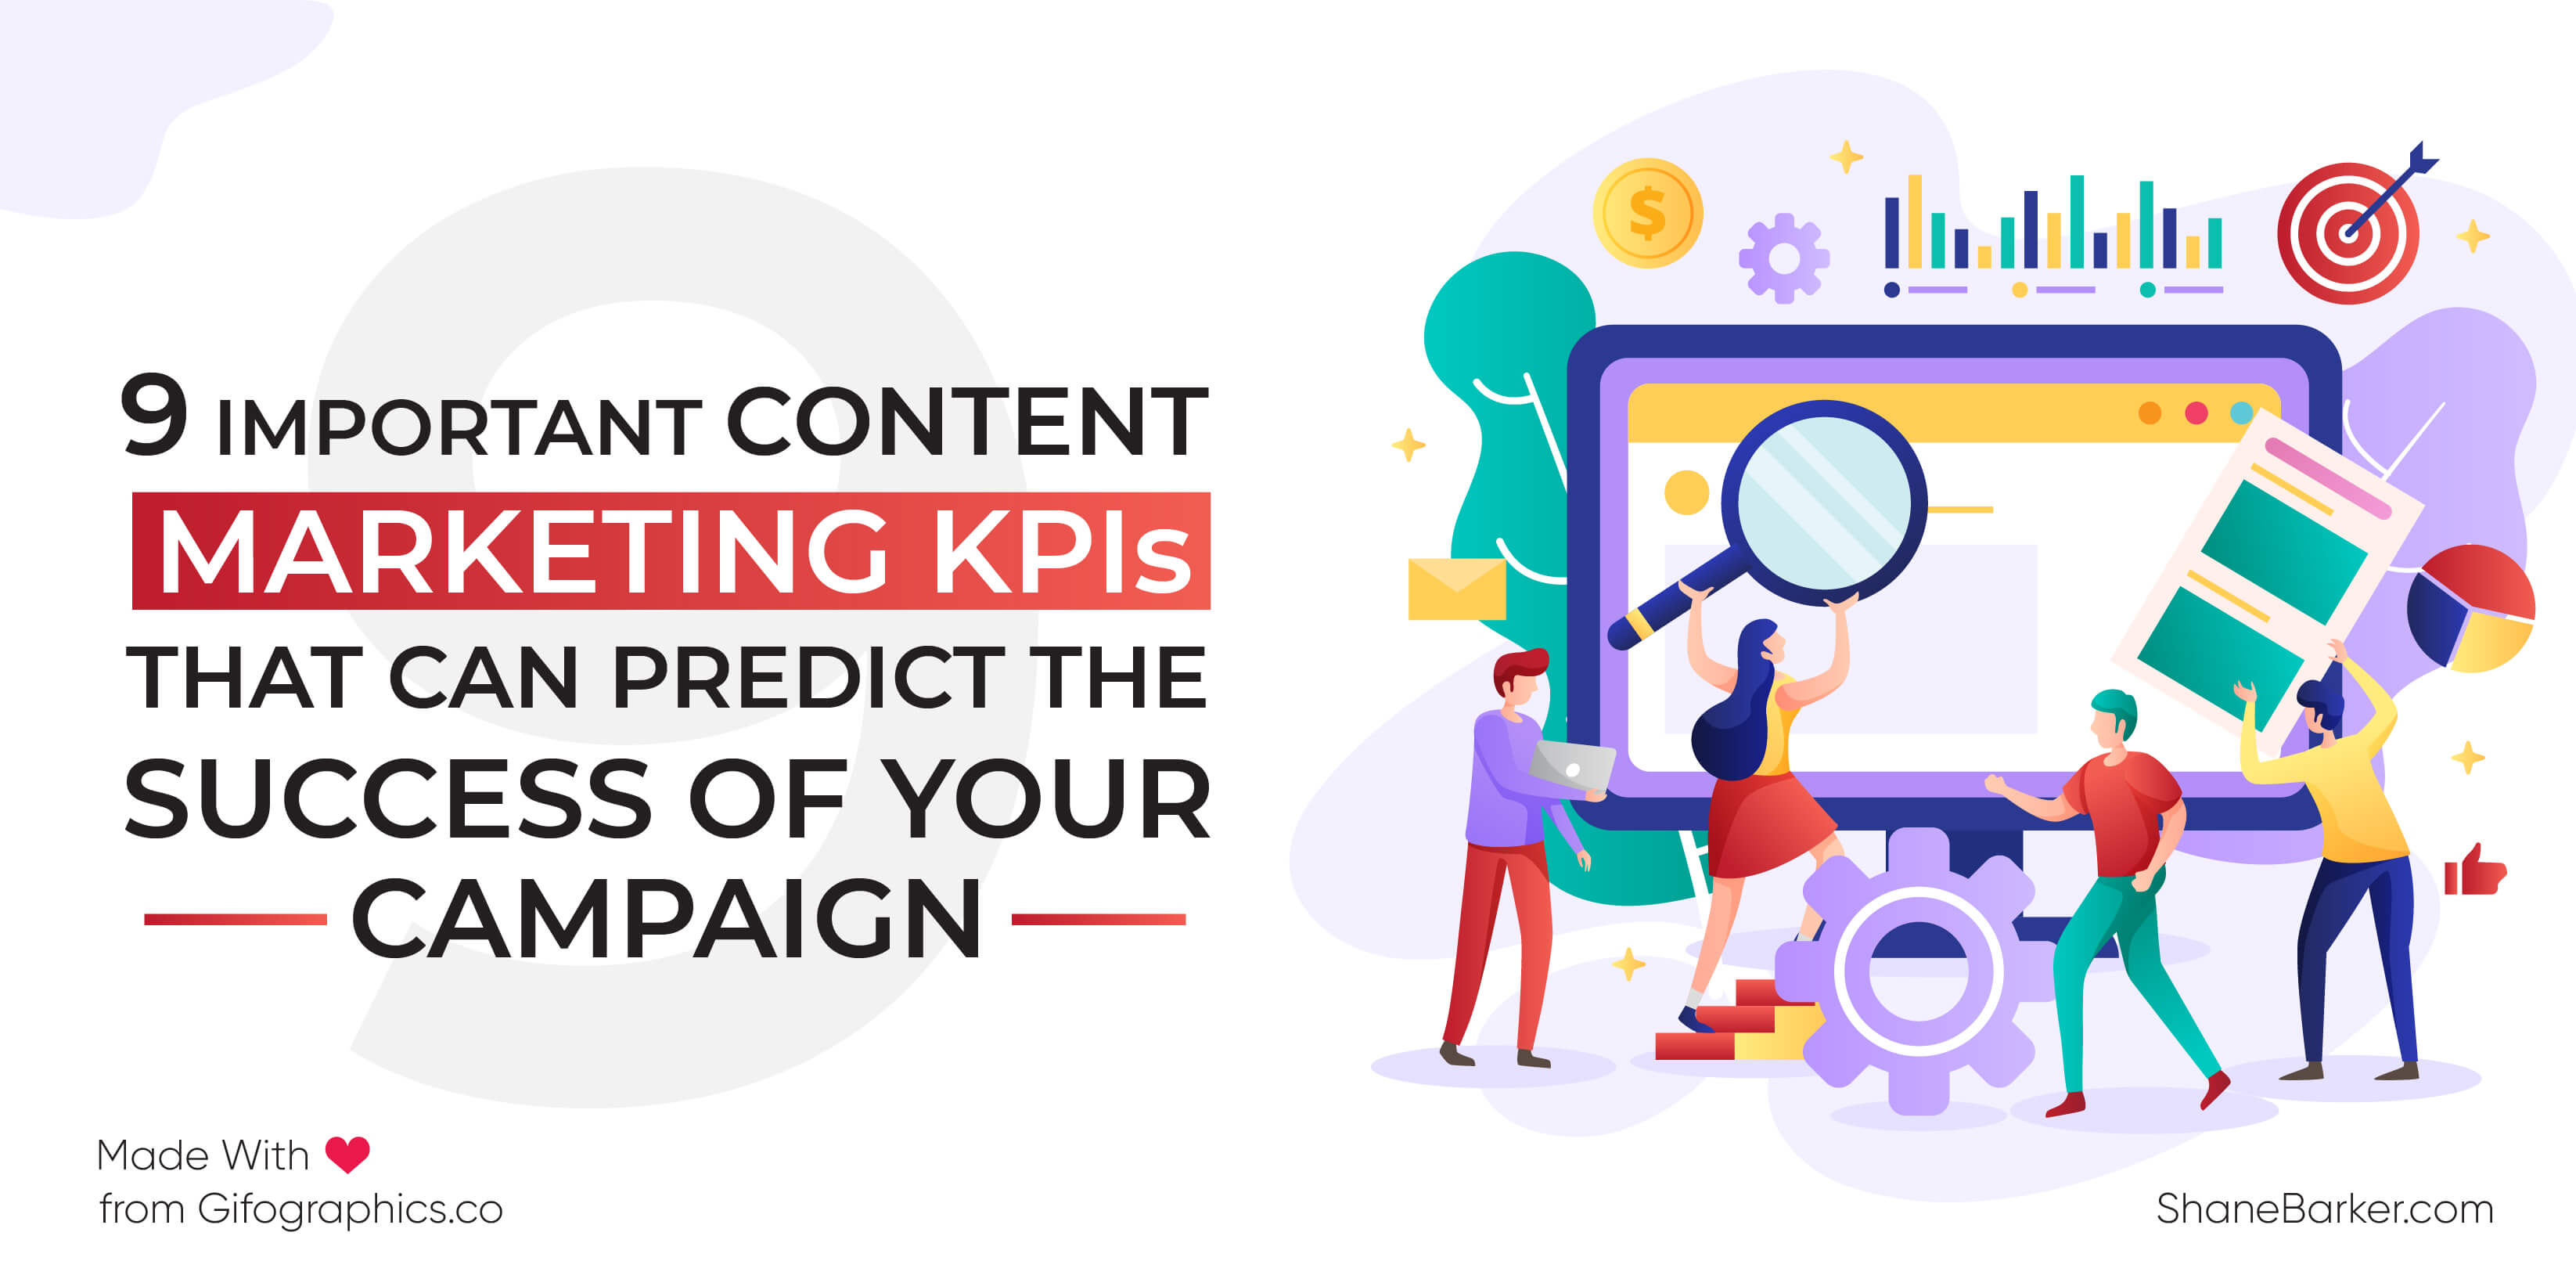 9 Important Content Marketing KPIs That Can Predict the Success of Your Campaign in 2023